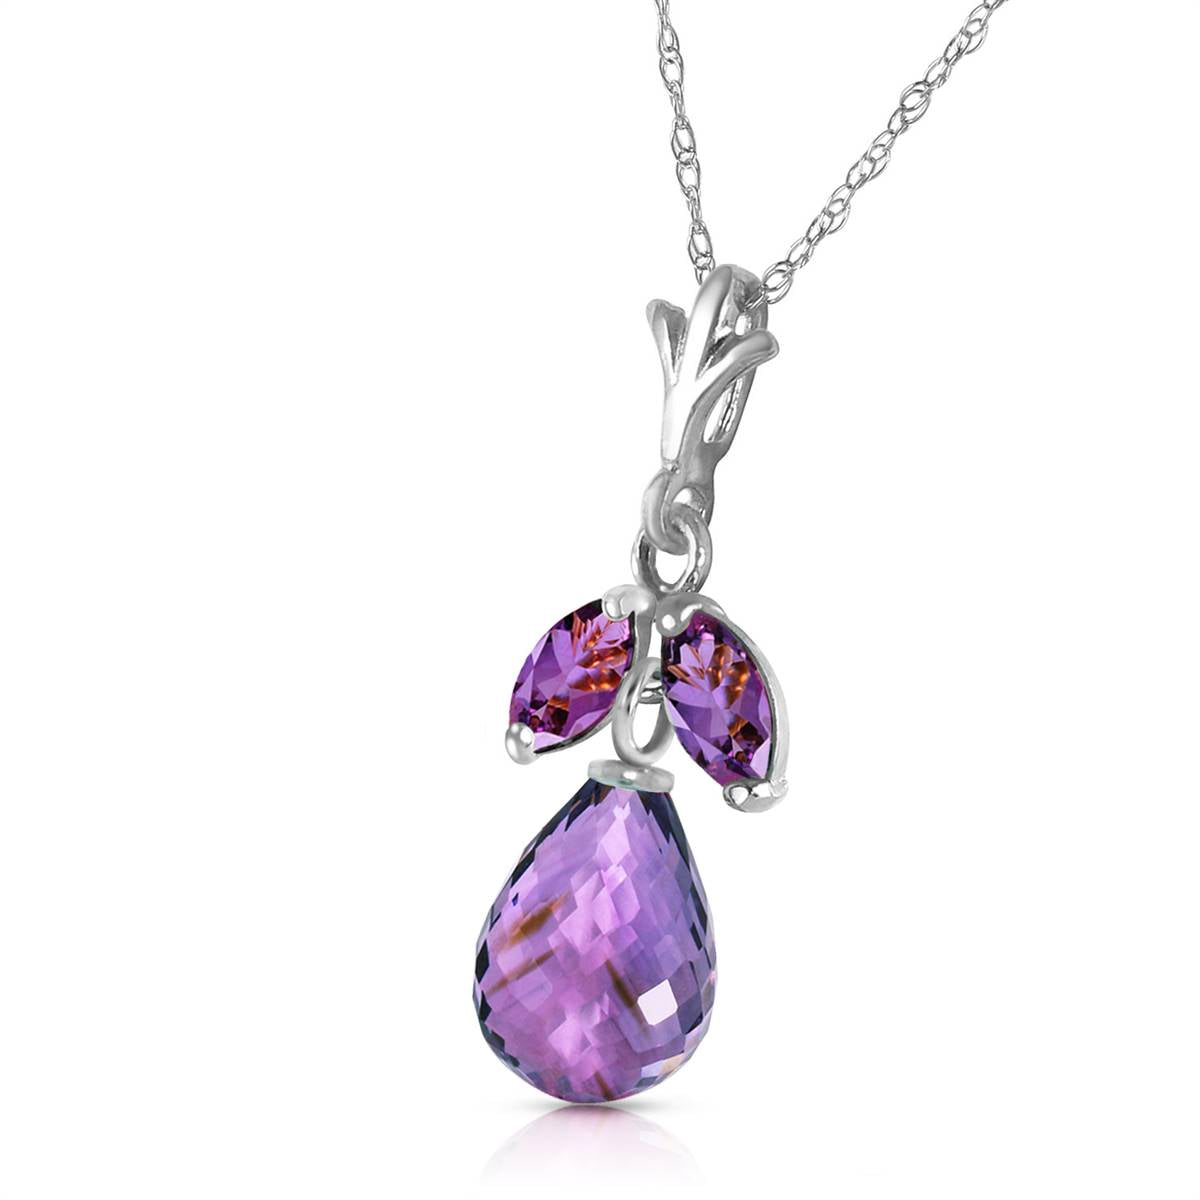 1.7 Carat 14K Solid White Gold Close Enough Amethyst Necklace